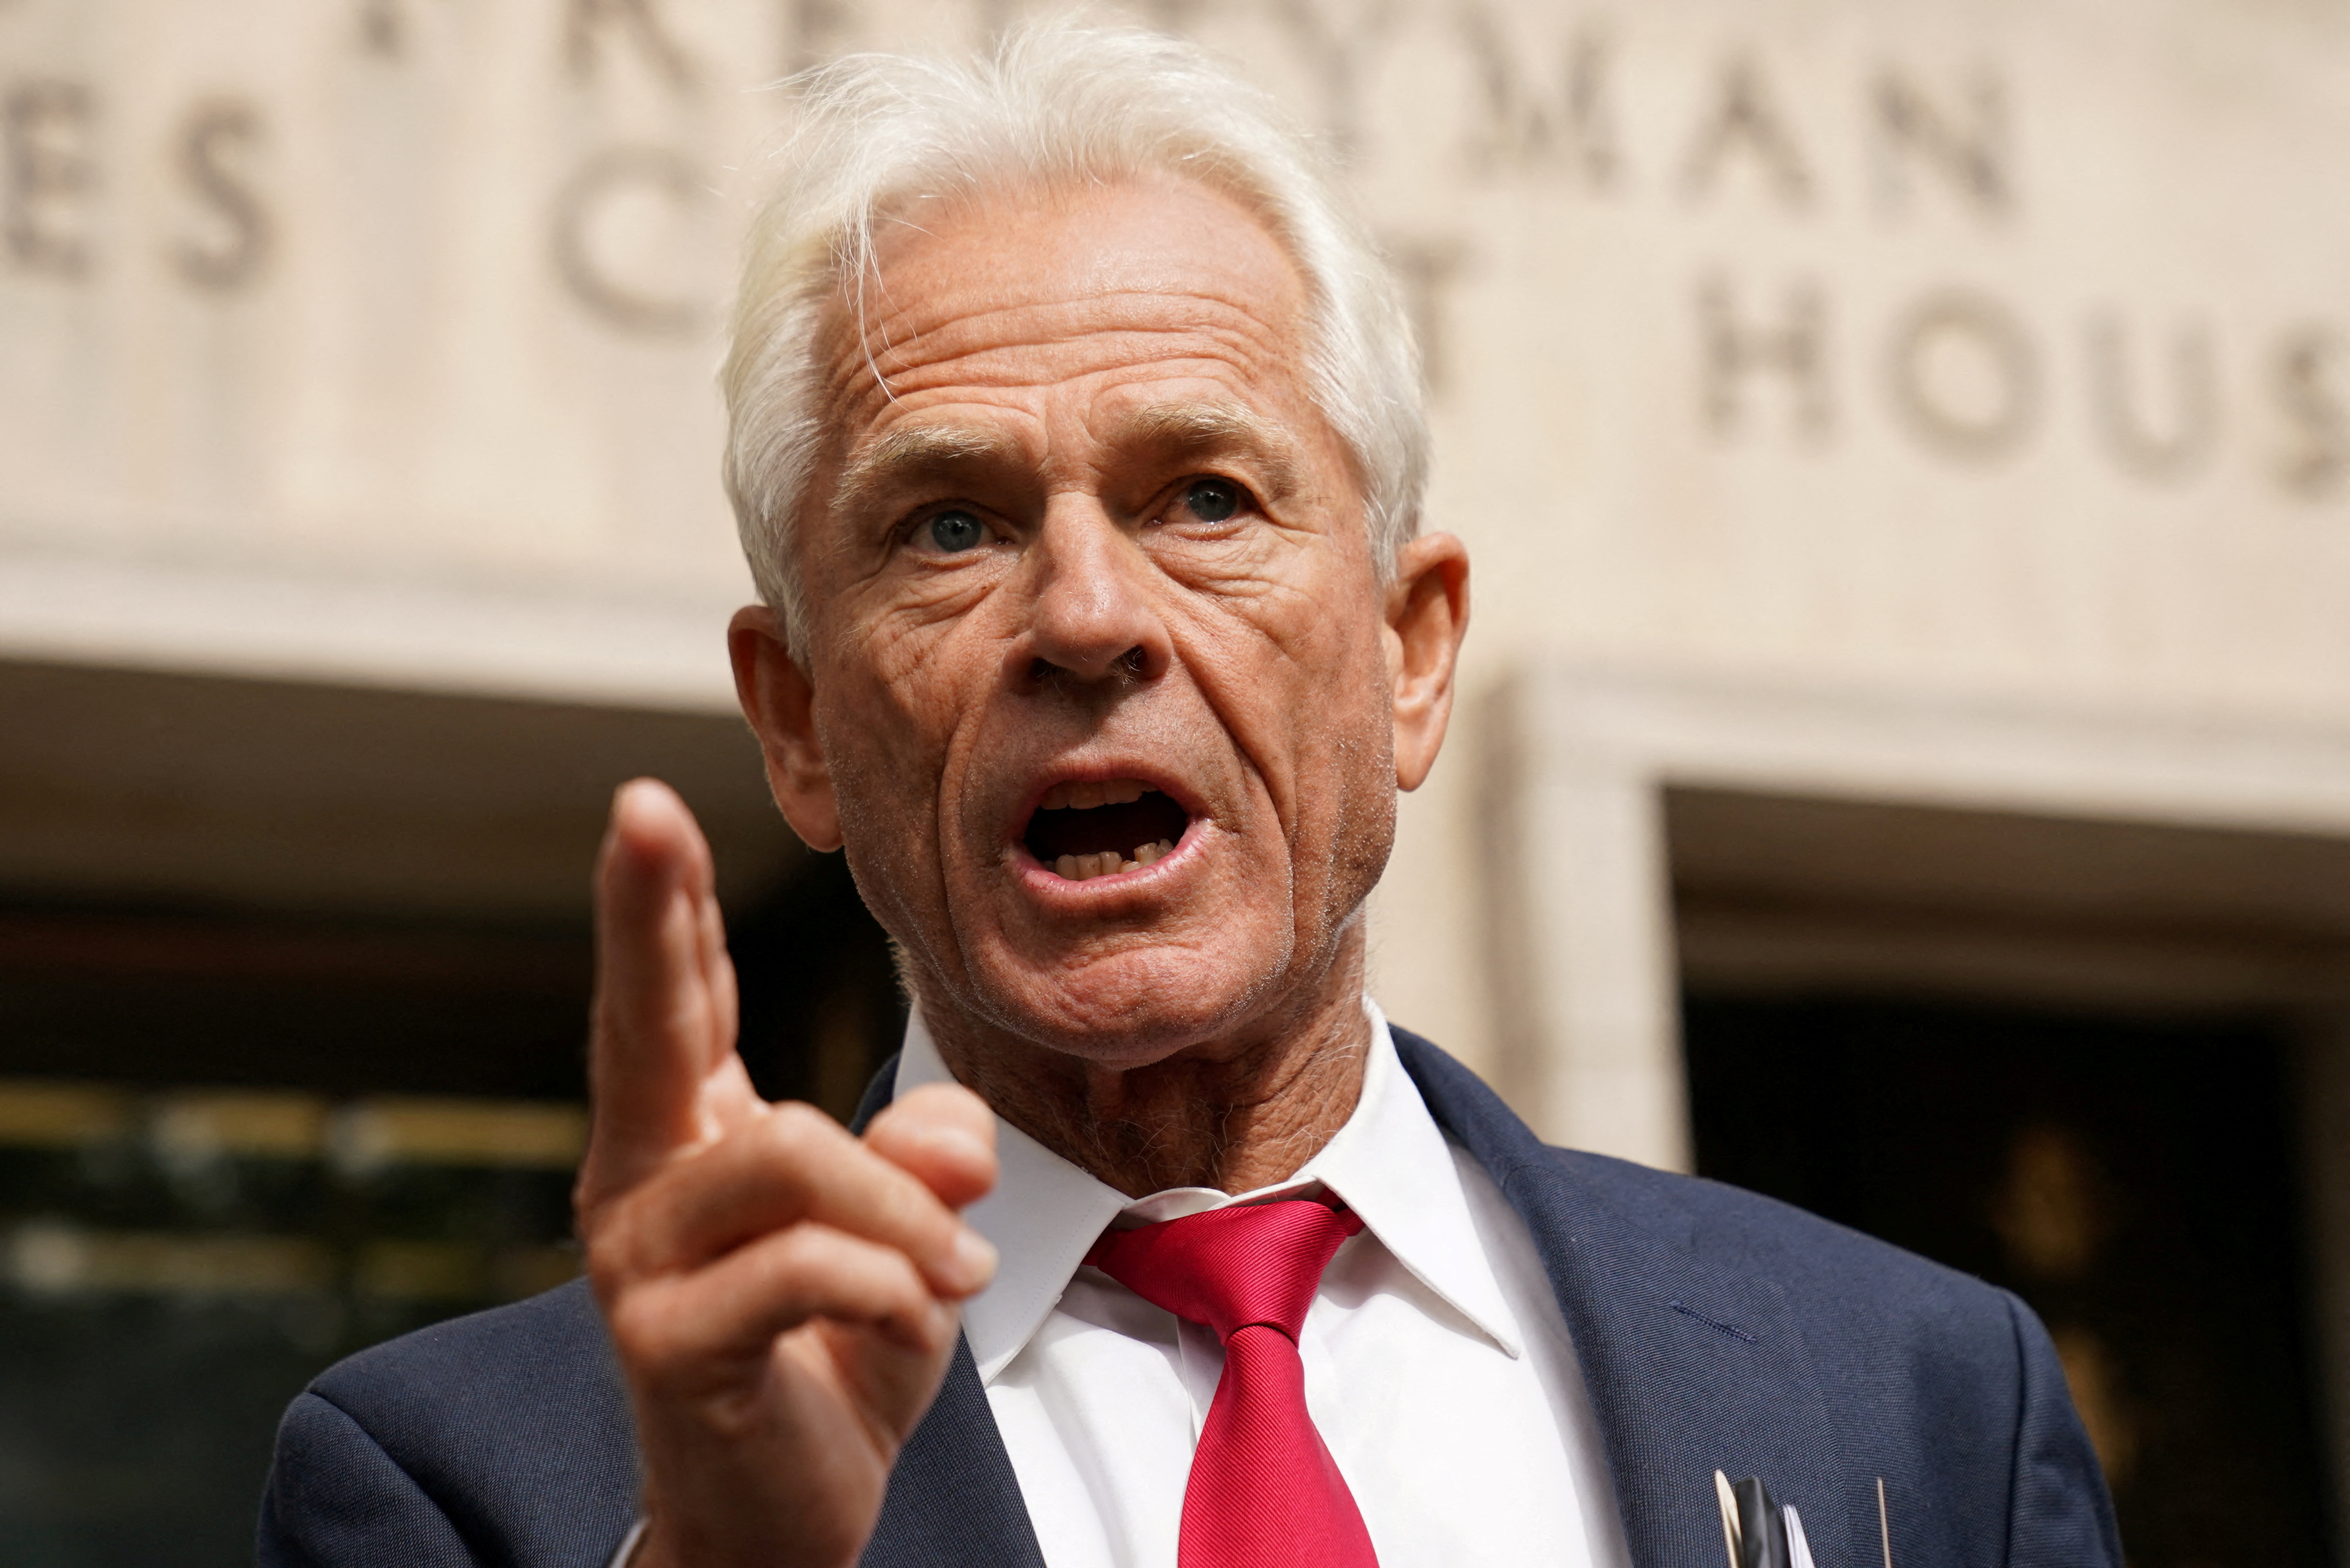 Former Trump trade adviser Peter Navarro indicted on contempt of Congress charges related to Jan. 6 attack on U.S. Capitol in Washington